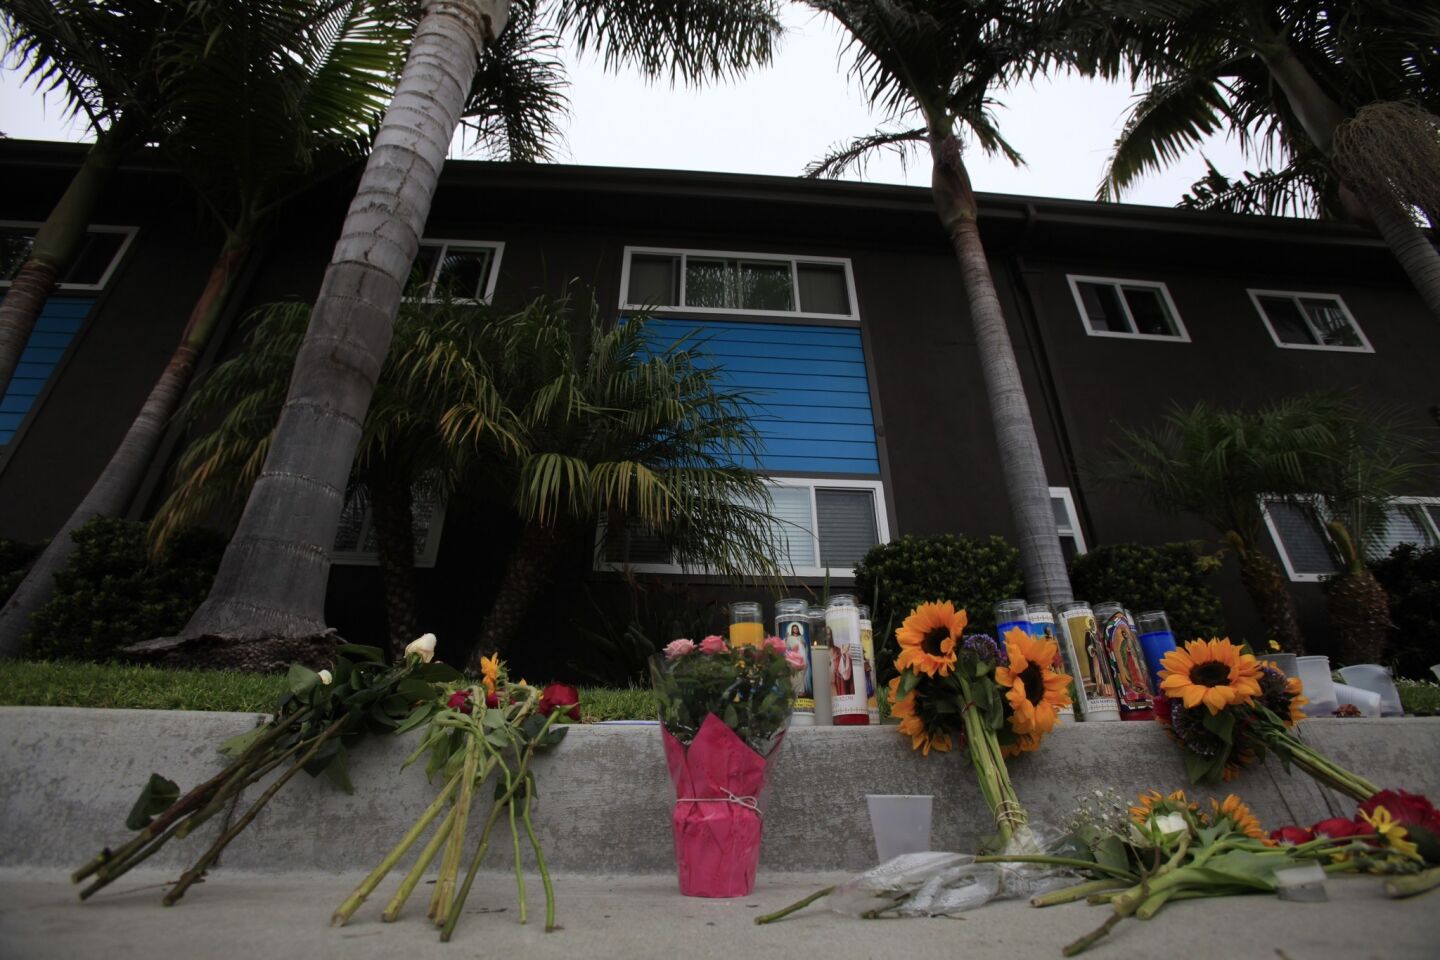 Flowers have been placed outside the apartment where Elliot Rodger lived and allegedly stabbed three victims to death in Isla Vista, Calif., near UC Santa Barbara.